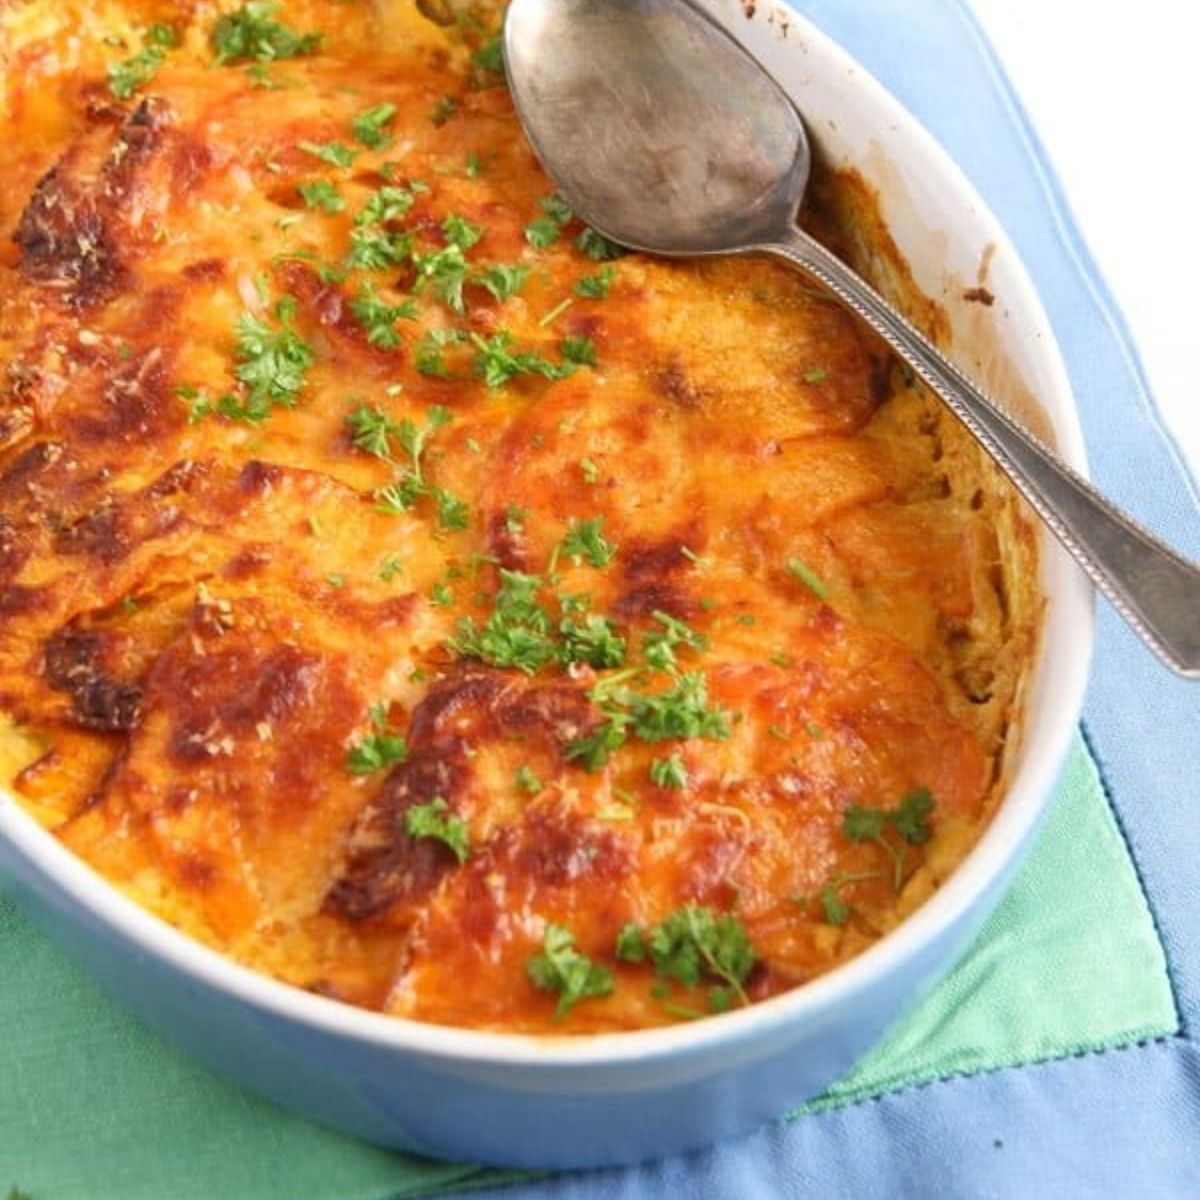 sweet potato dauphinoise in a small blue dish on a green cloth.